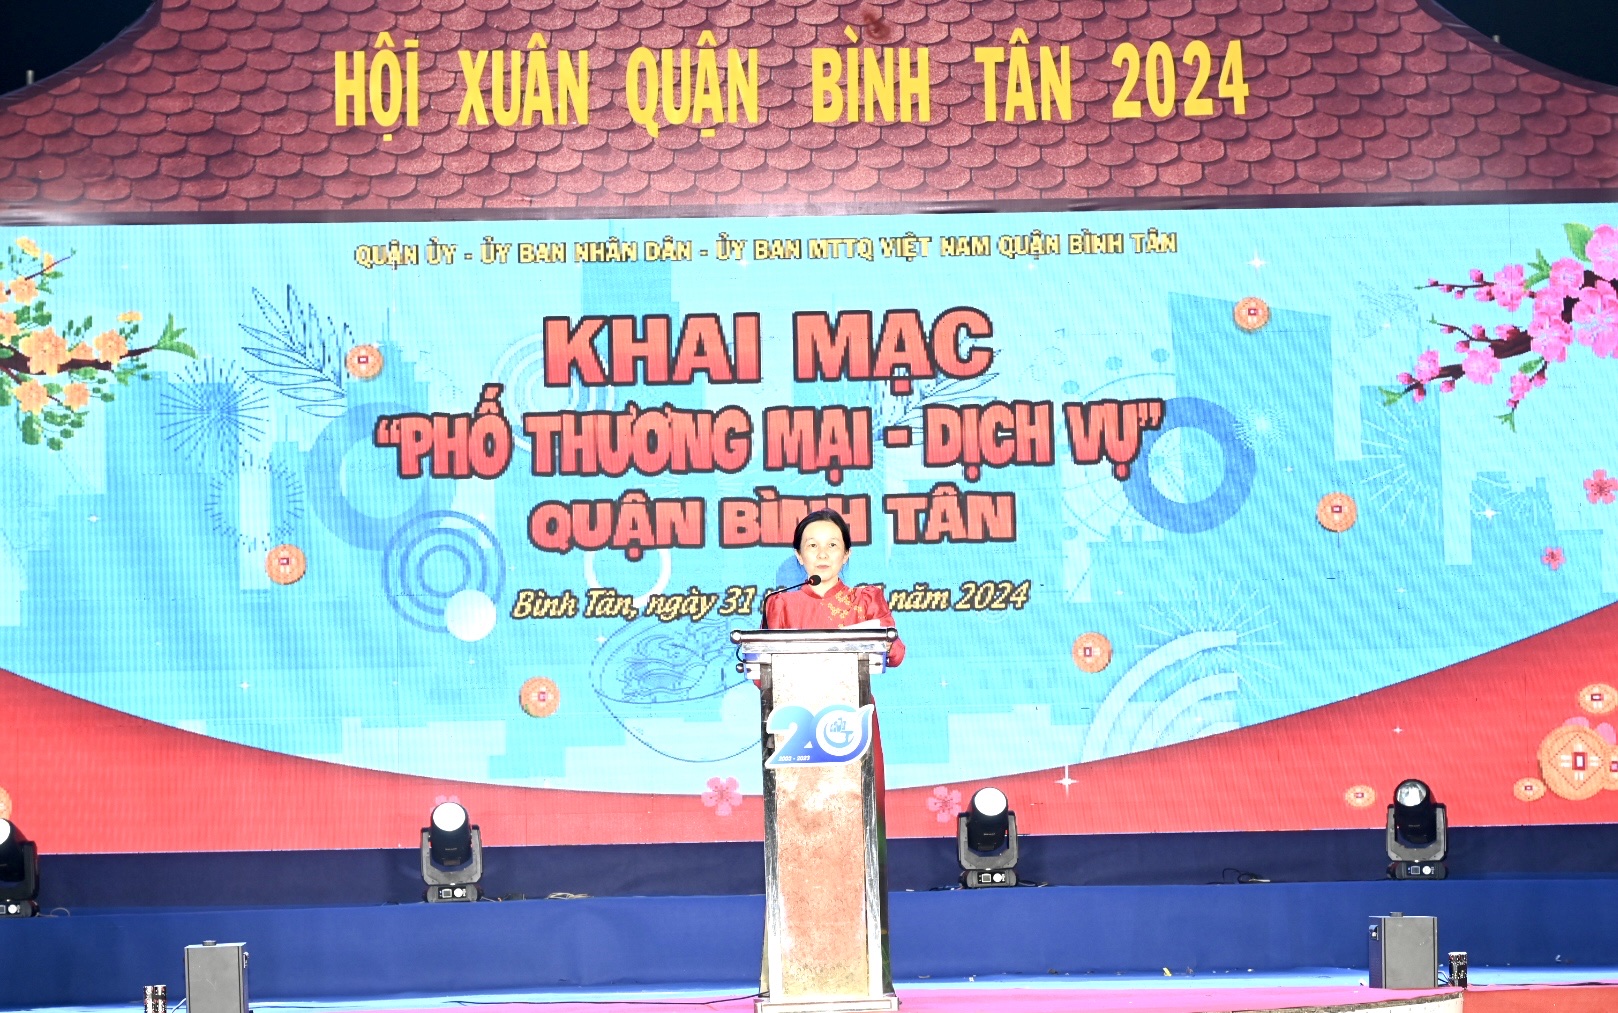 Vice Chairwoman of Binh Tan District People’s Committee Pham Thi Ngoc Dieu delivers the opening speech